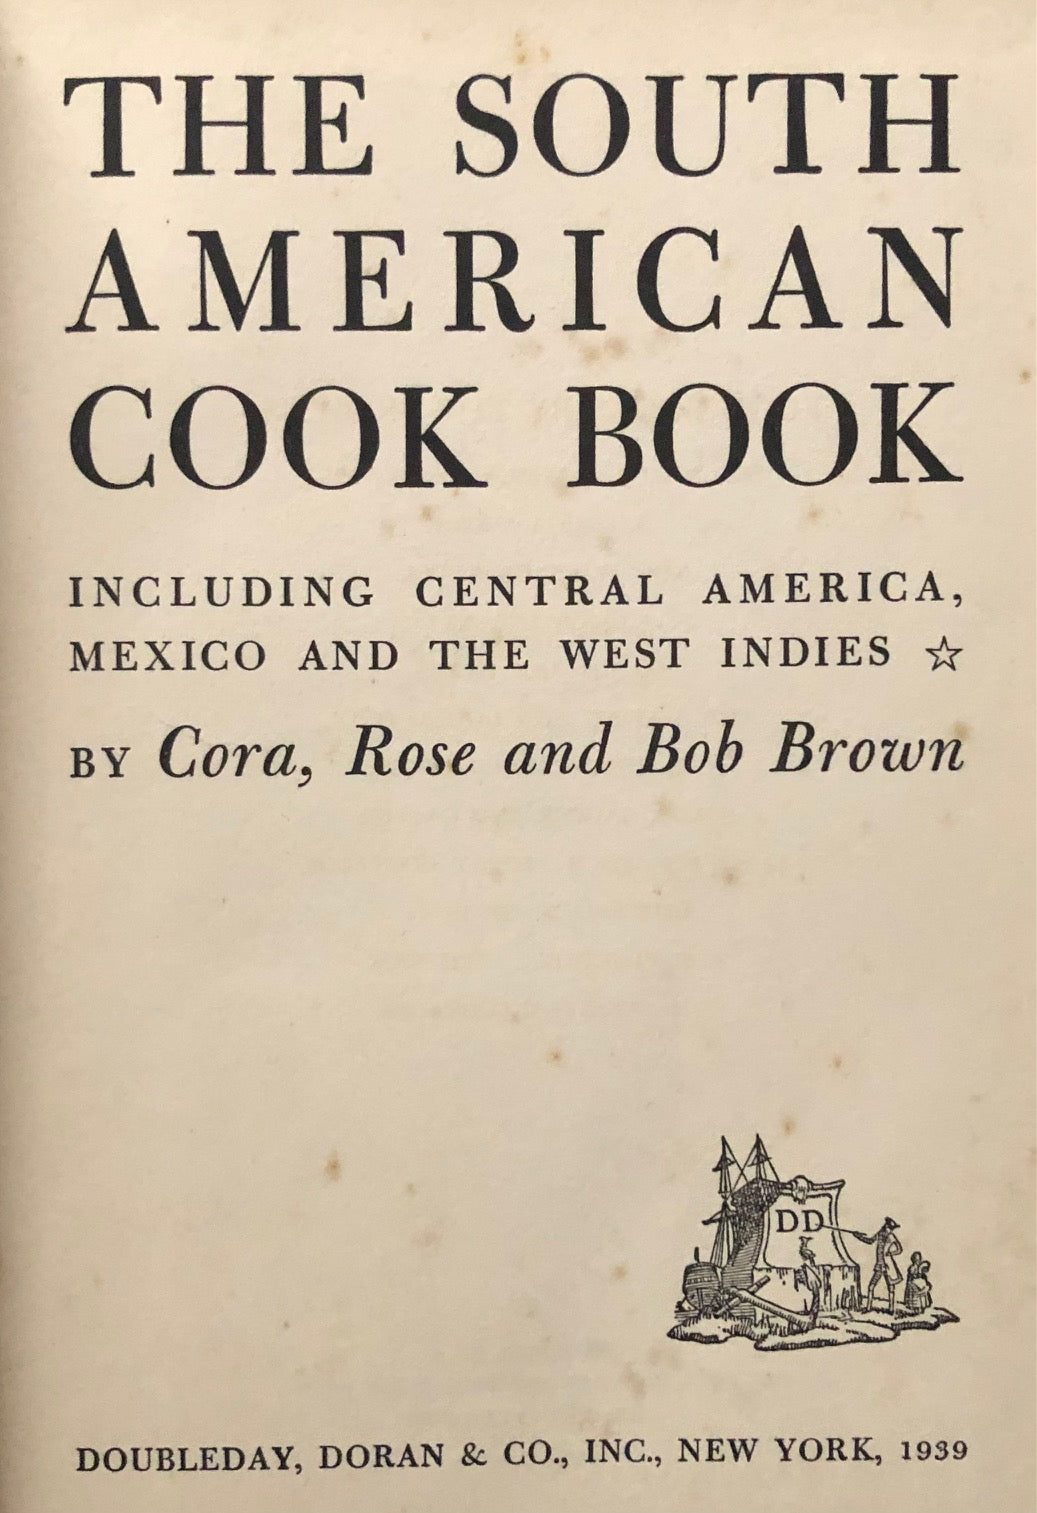 (*NEW ARRIVAL*) (South American) Cora, Rose & Bob Brown. The South American Cook Book, including Central America, Mexico and the West Indies